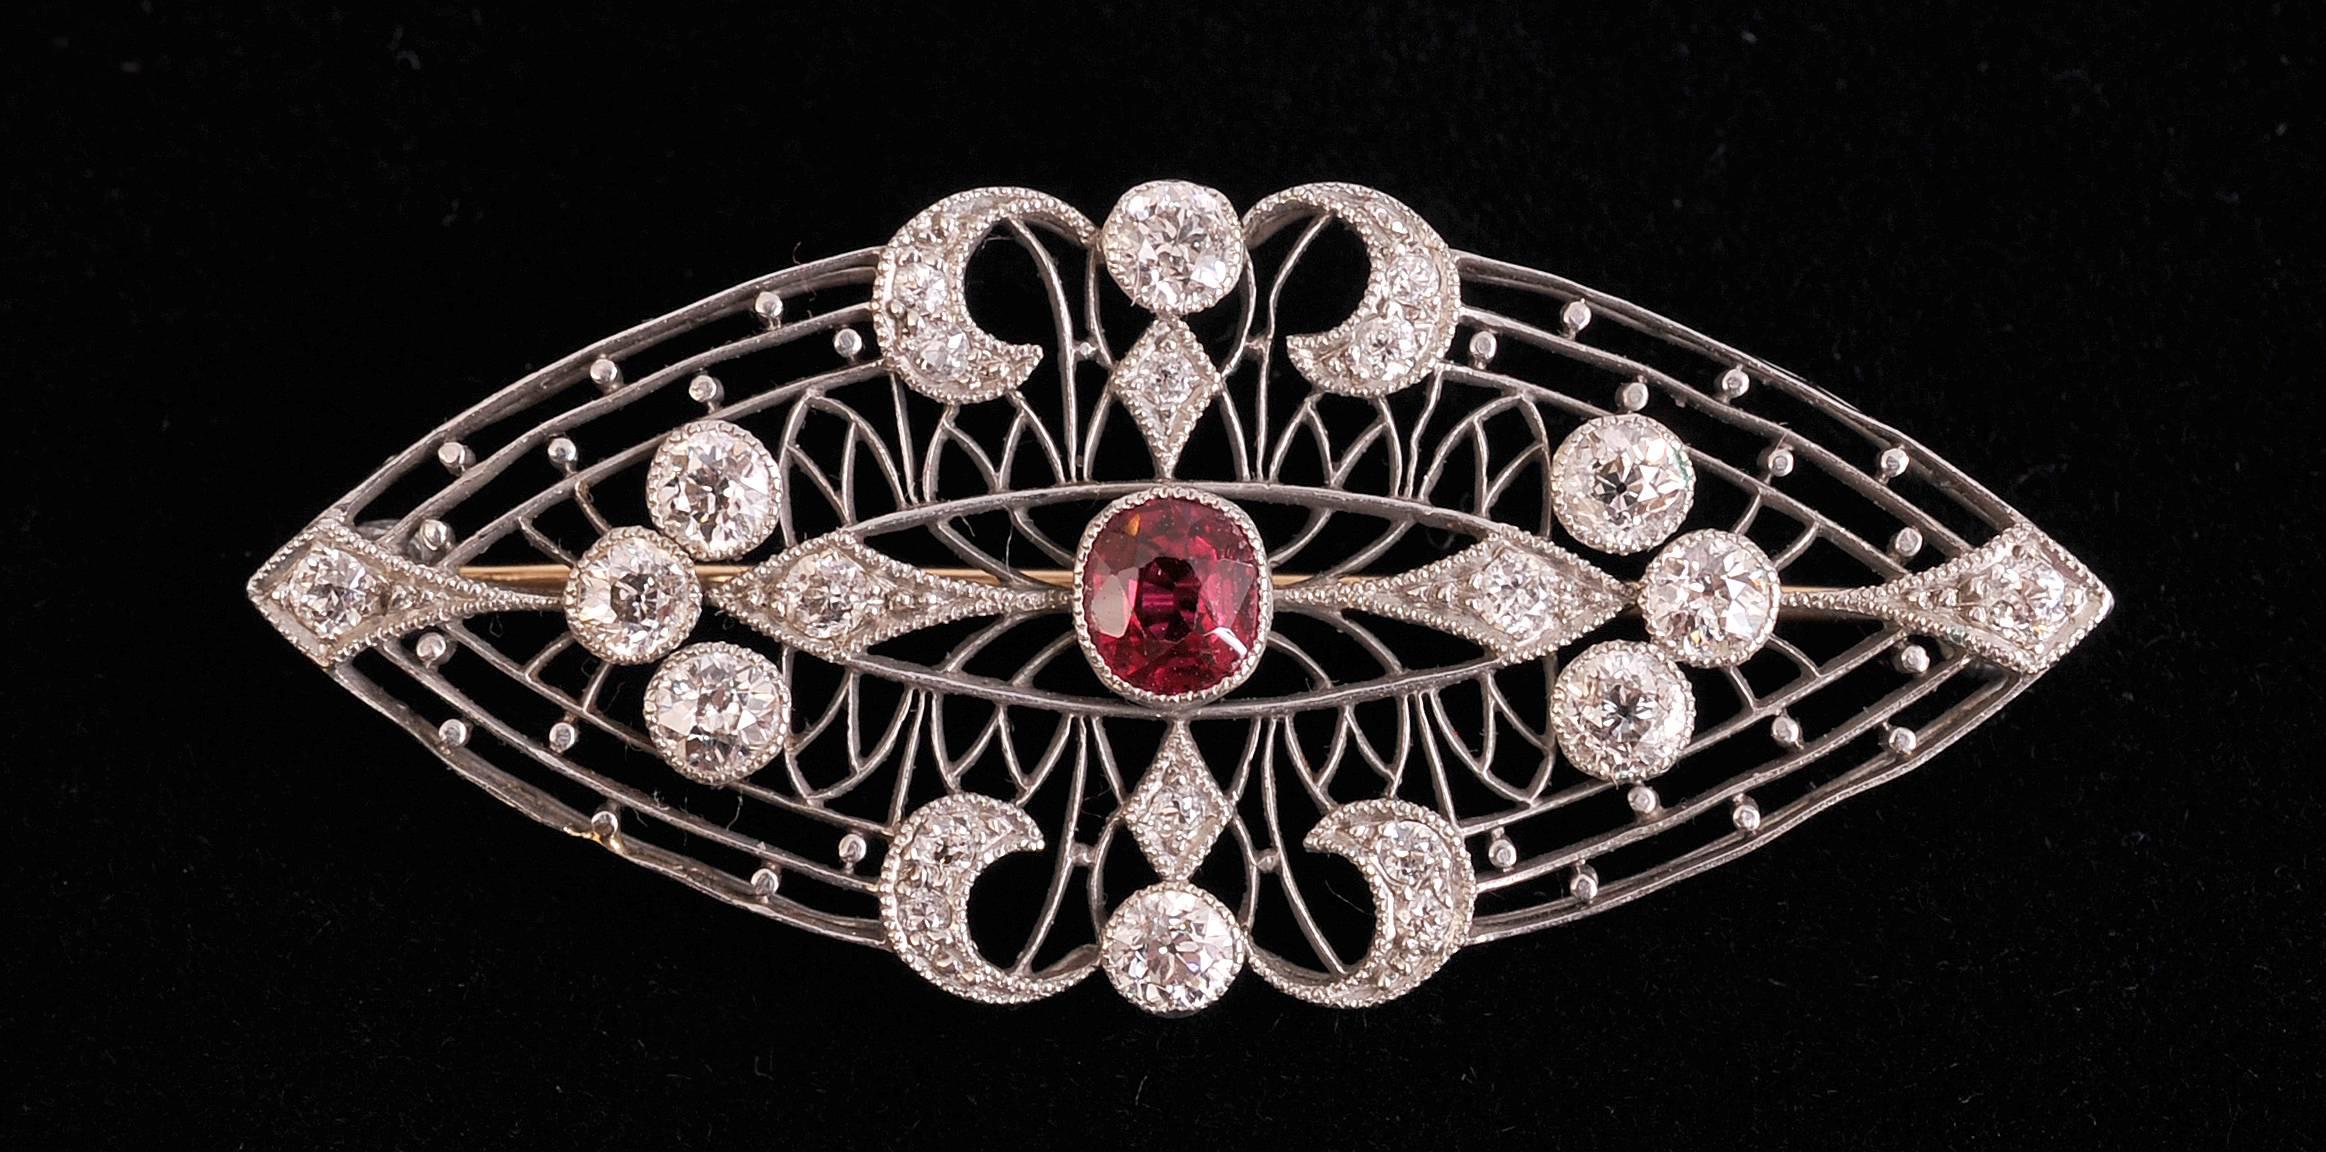 An intense pigeon blood red Burma ruby is the central stone in this striking platinum filigree brooch. It is surrounded by old mine diamonds. This stunning piece is in excellent condition
Stones
Ruby   Intense pigeon blood red Burma ruby weight .65